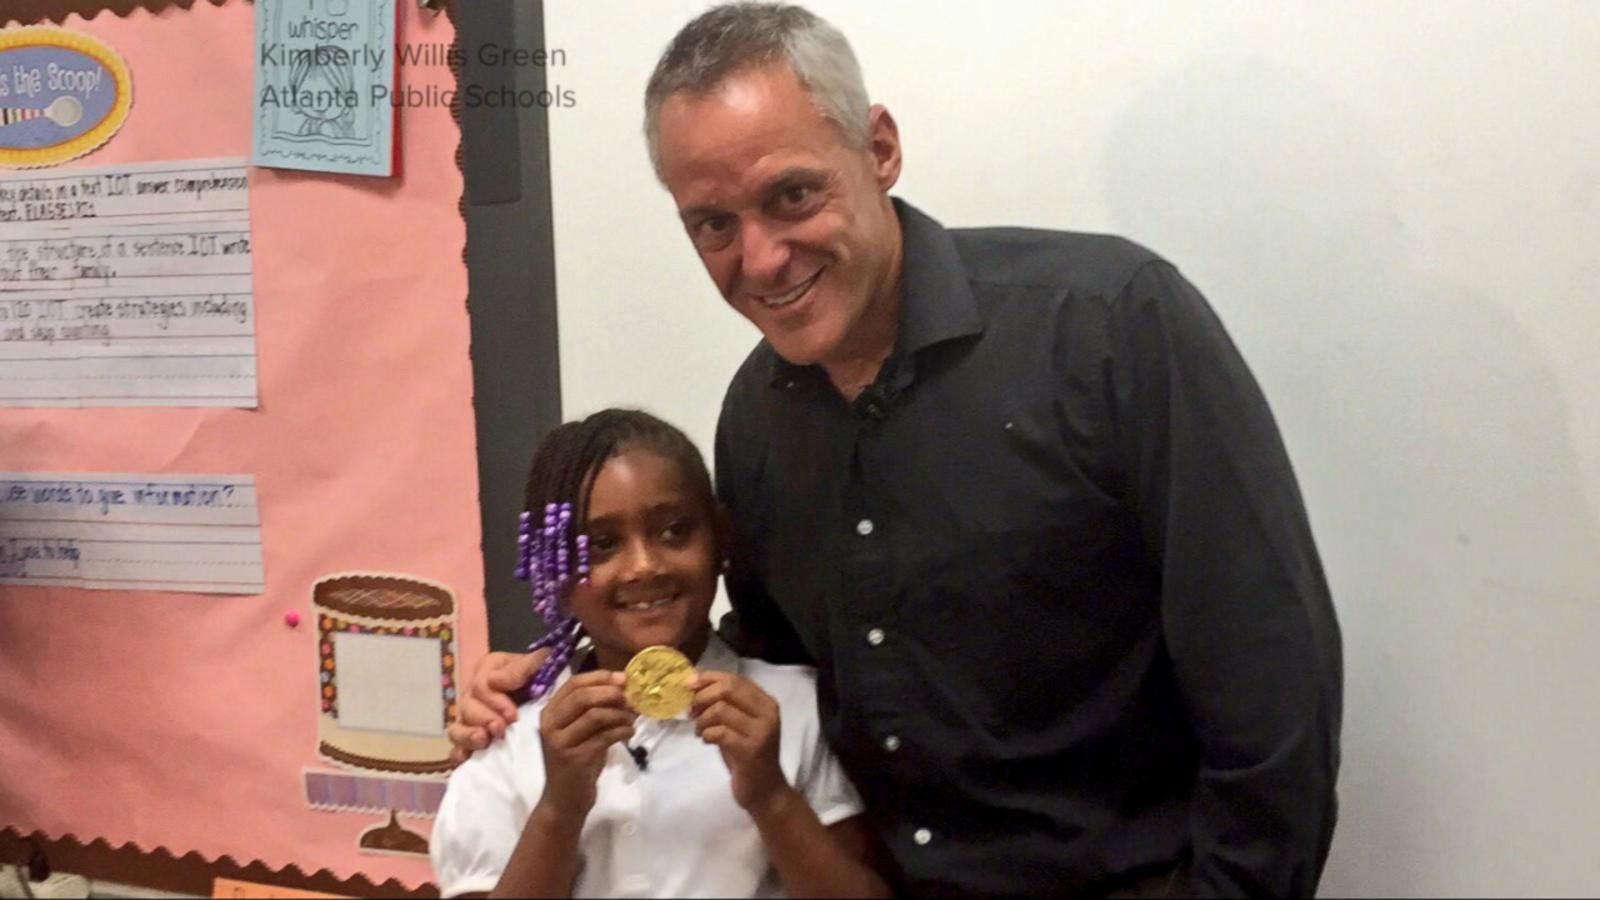 7-Year-Old Finds, Returns Olympic Gold Medal 